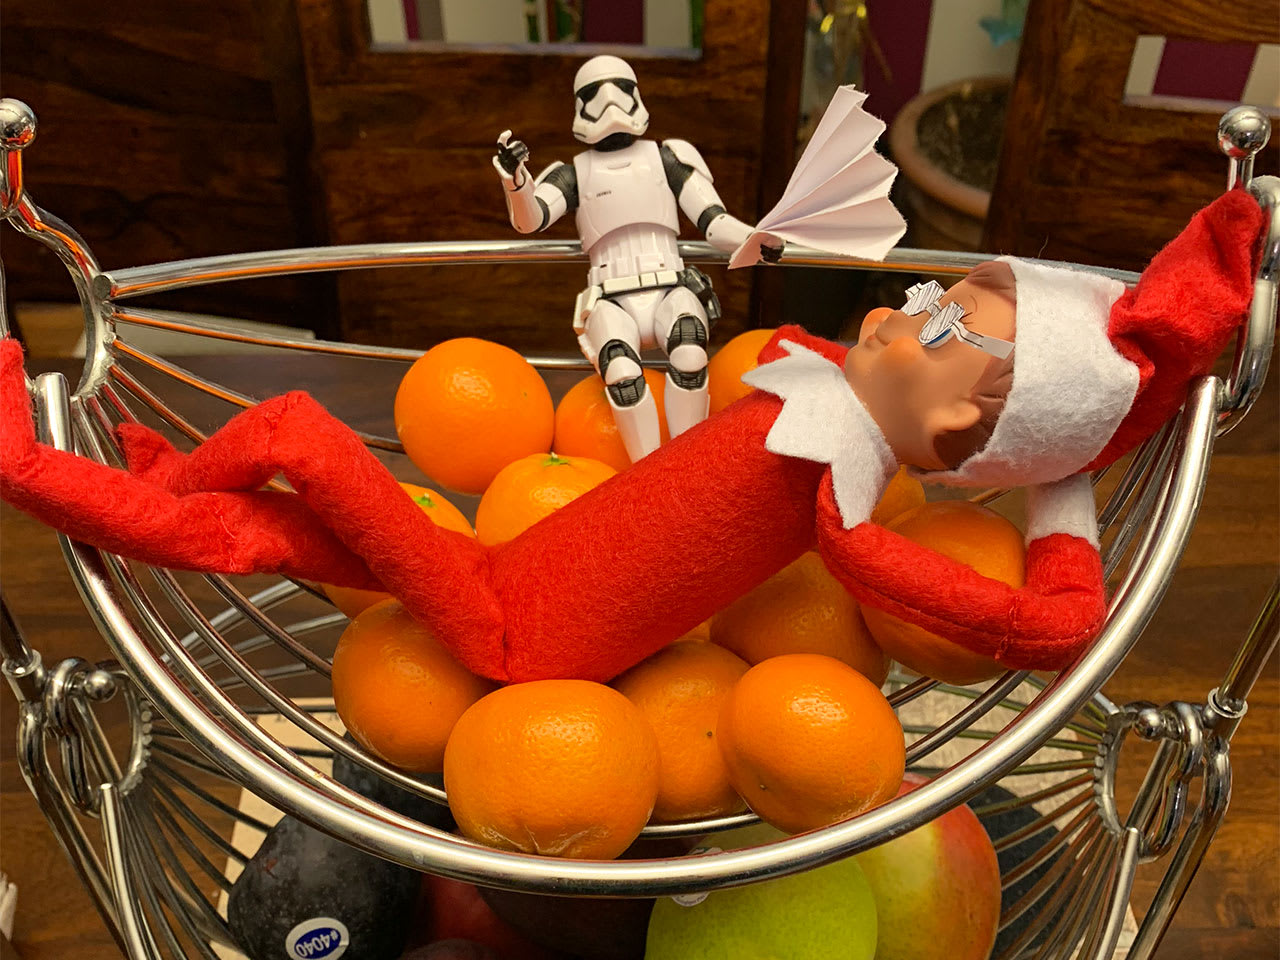 Whatever, haters: I'm LOVING coming up with Elf on the Shelf ideas